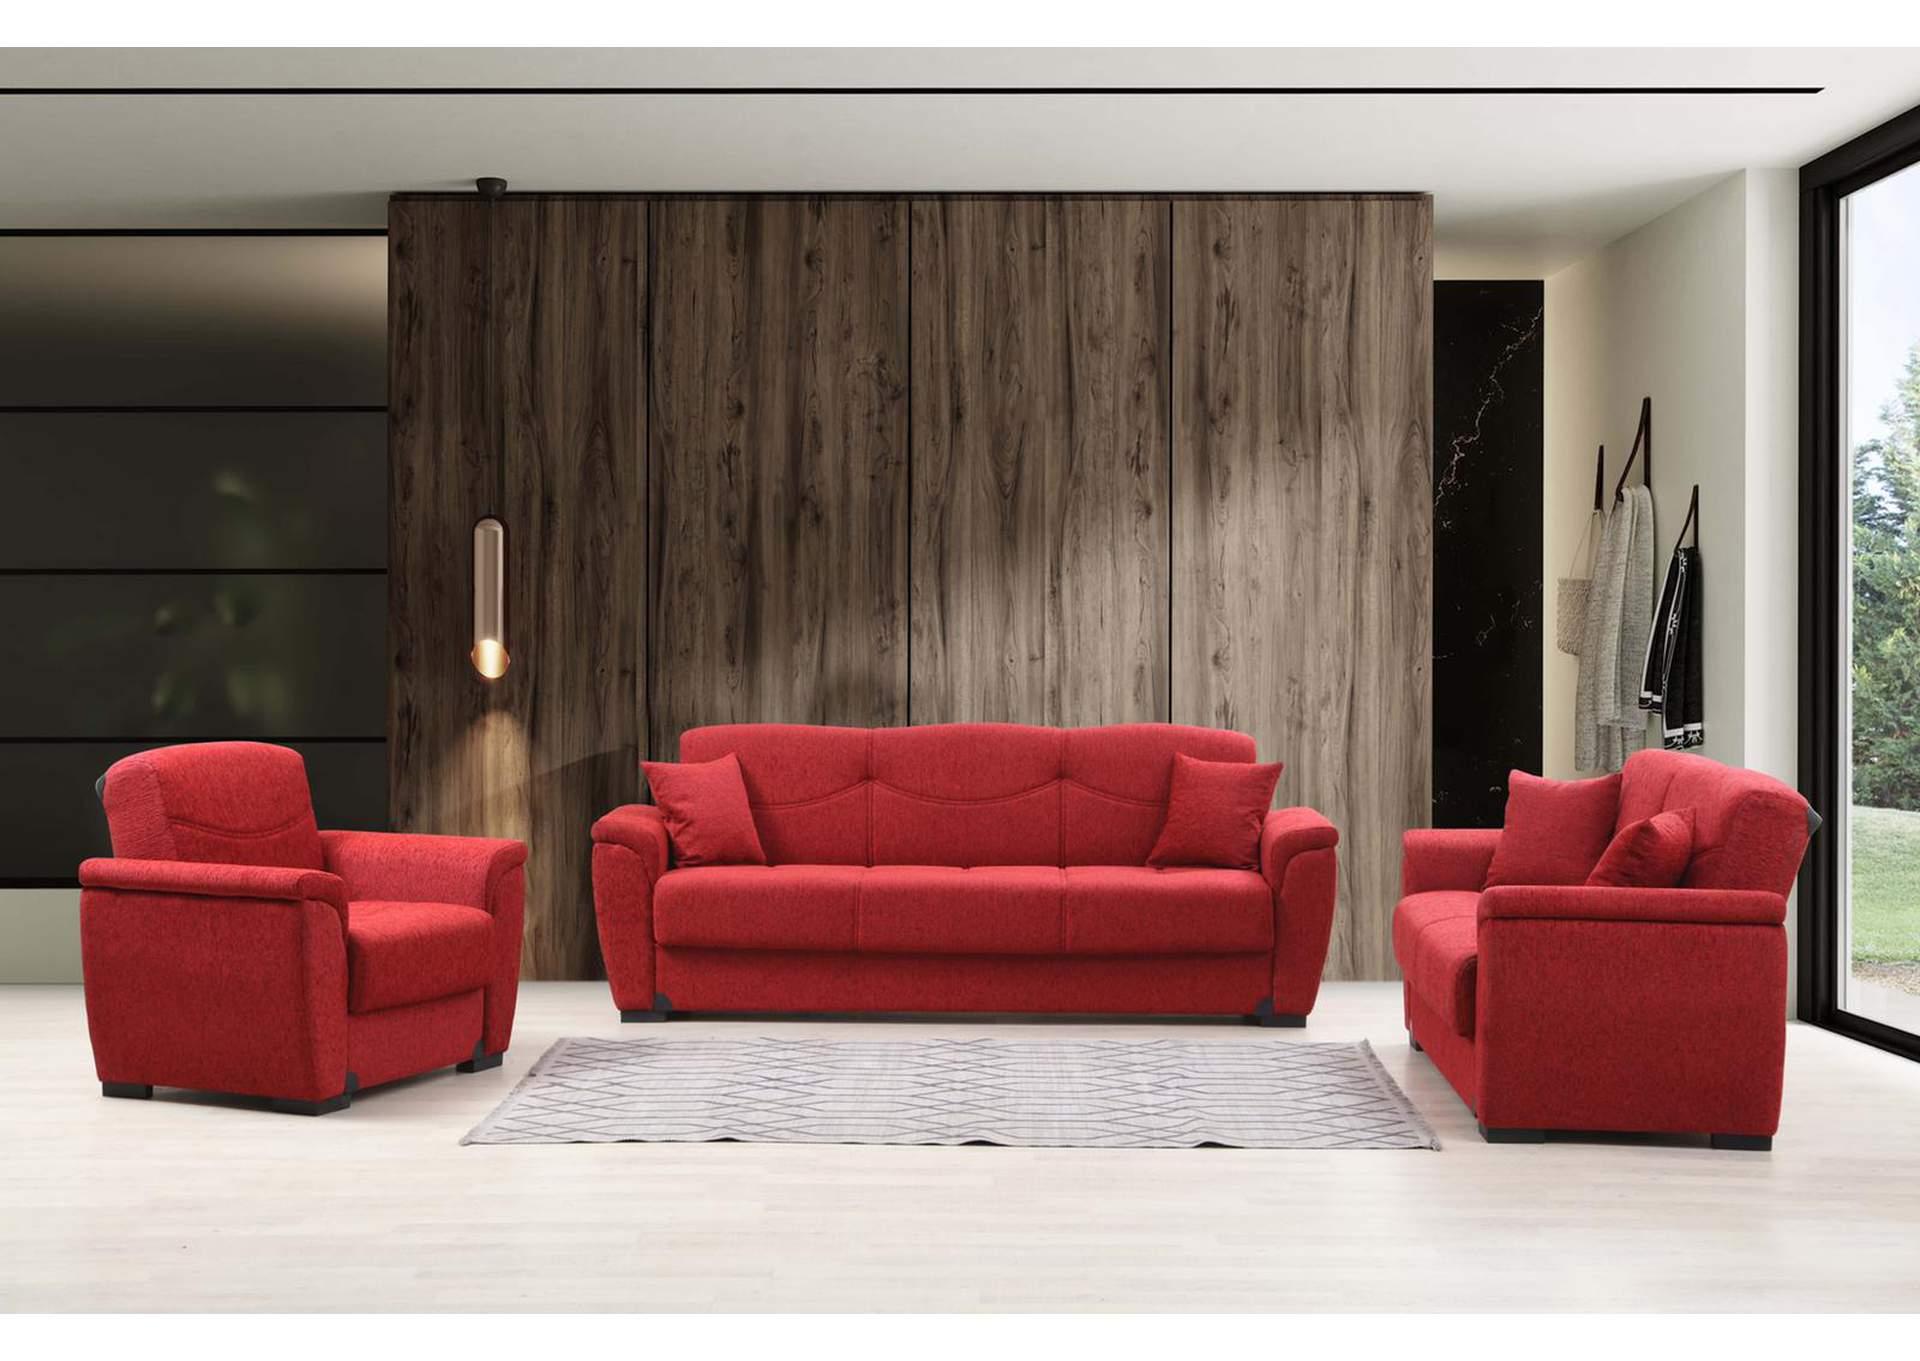 

    
Red Chenille Fabric Sofa Bed Set 3Pcs Contemporary Alpha Furniture Everly
